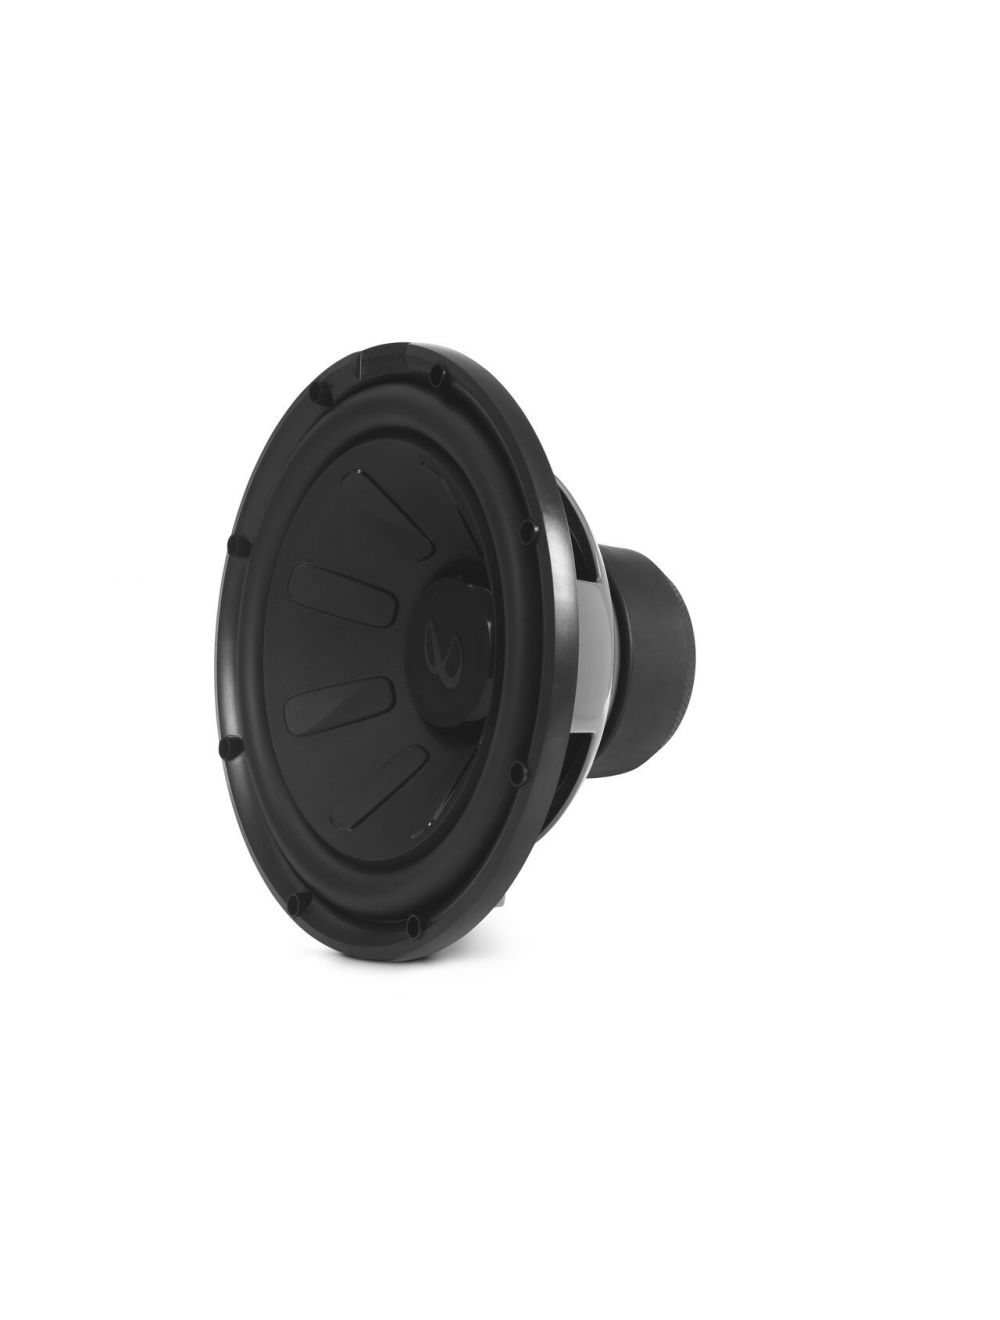 Infinity Kappa PRIMUS1270 12" Performance Subwoofer 4 Ohm Voice Coil Rubber Surround 250W Rms / 1000W Peak